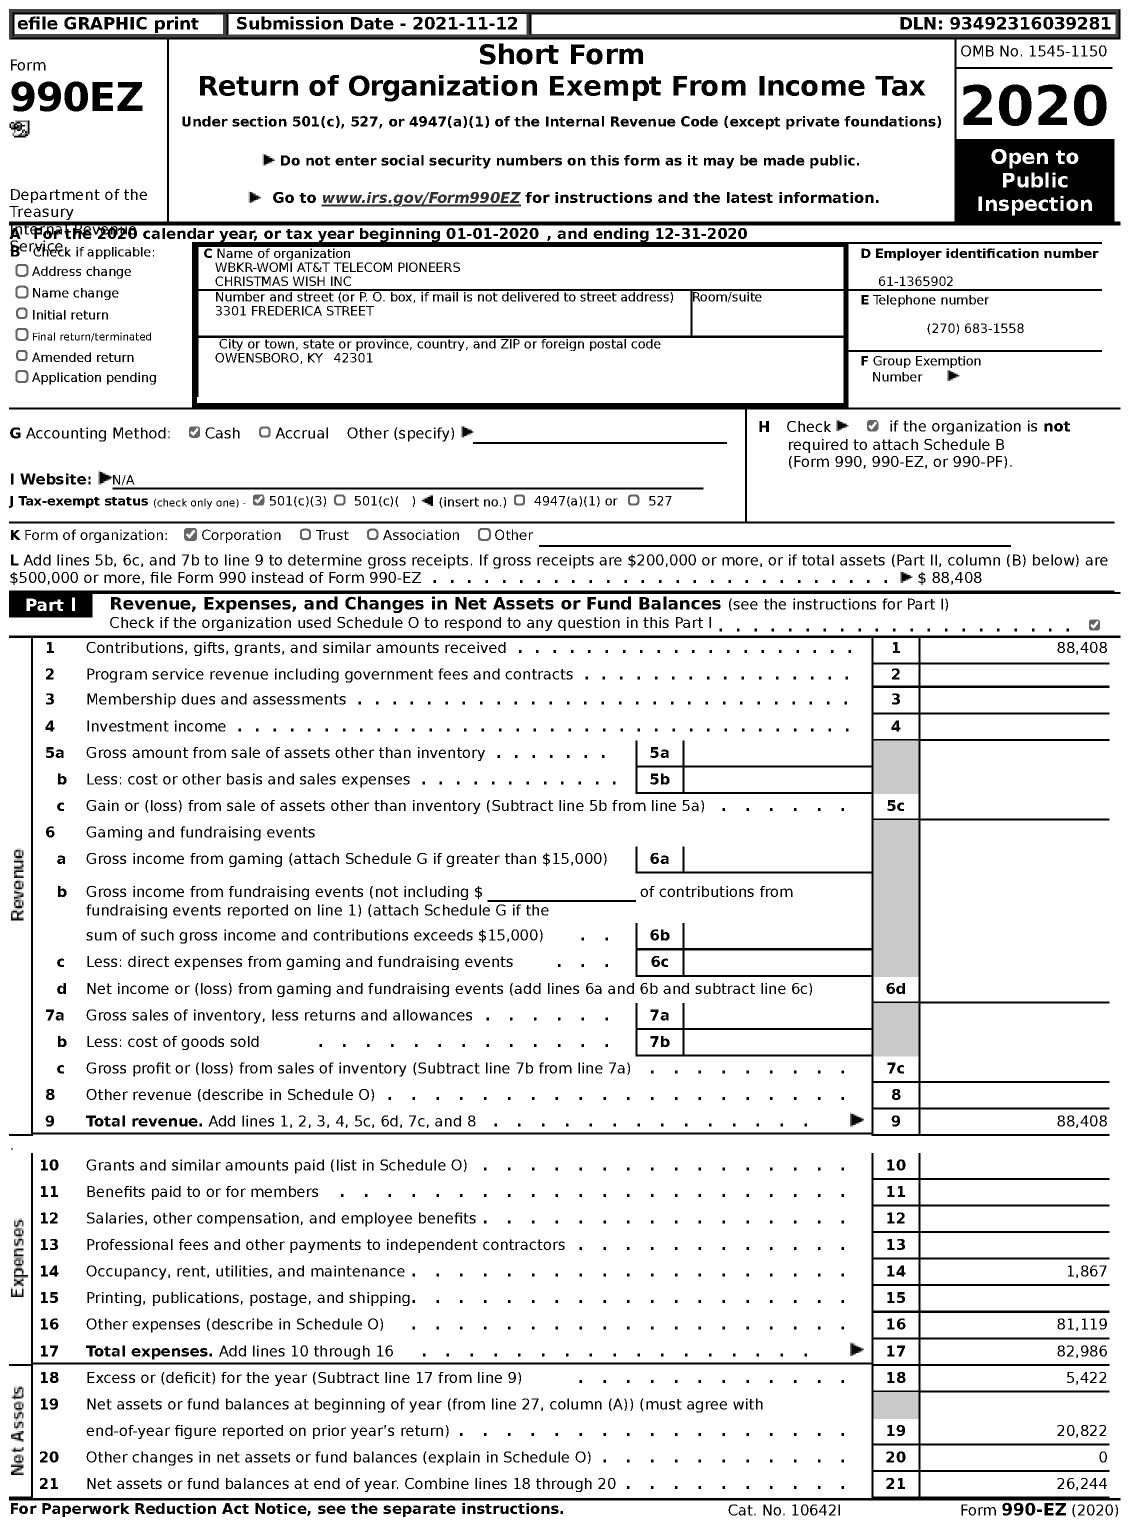 Image of first page of 2020 Form 990EZ for Wbkr-Womi At&t Telecom Pioneers Christmas Wish